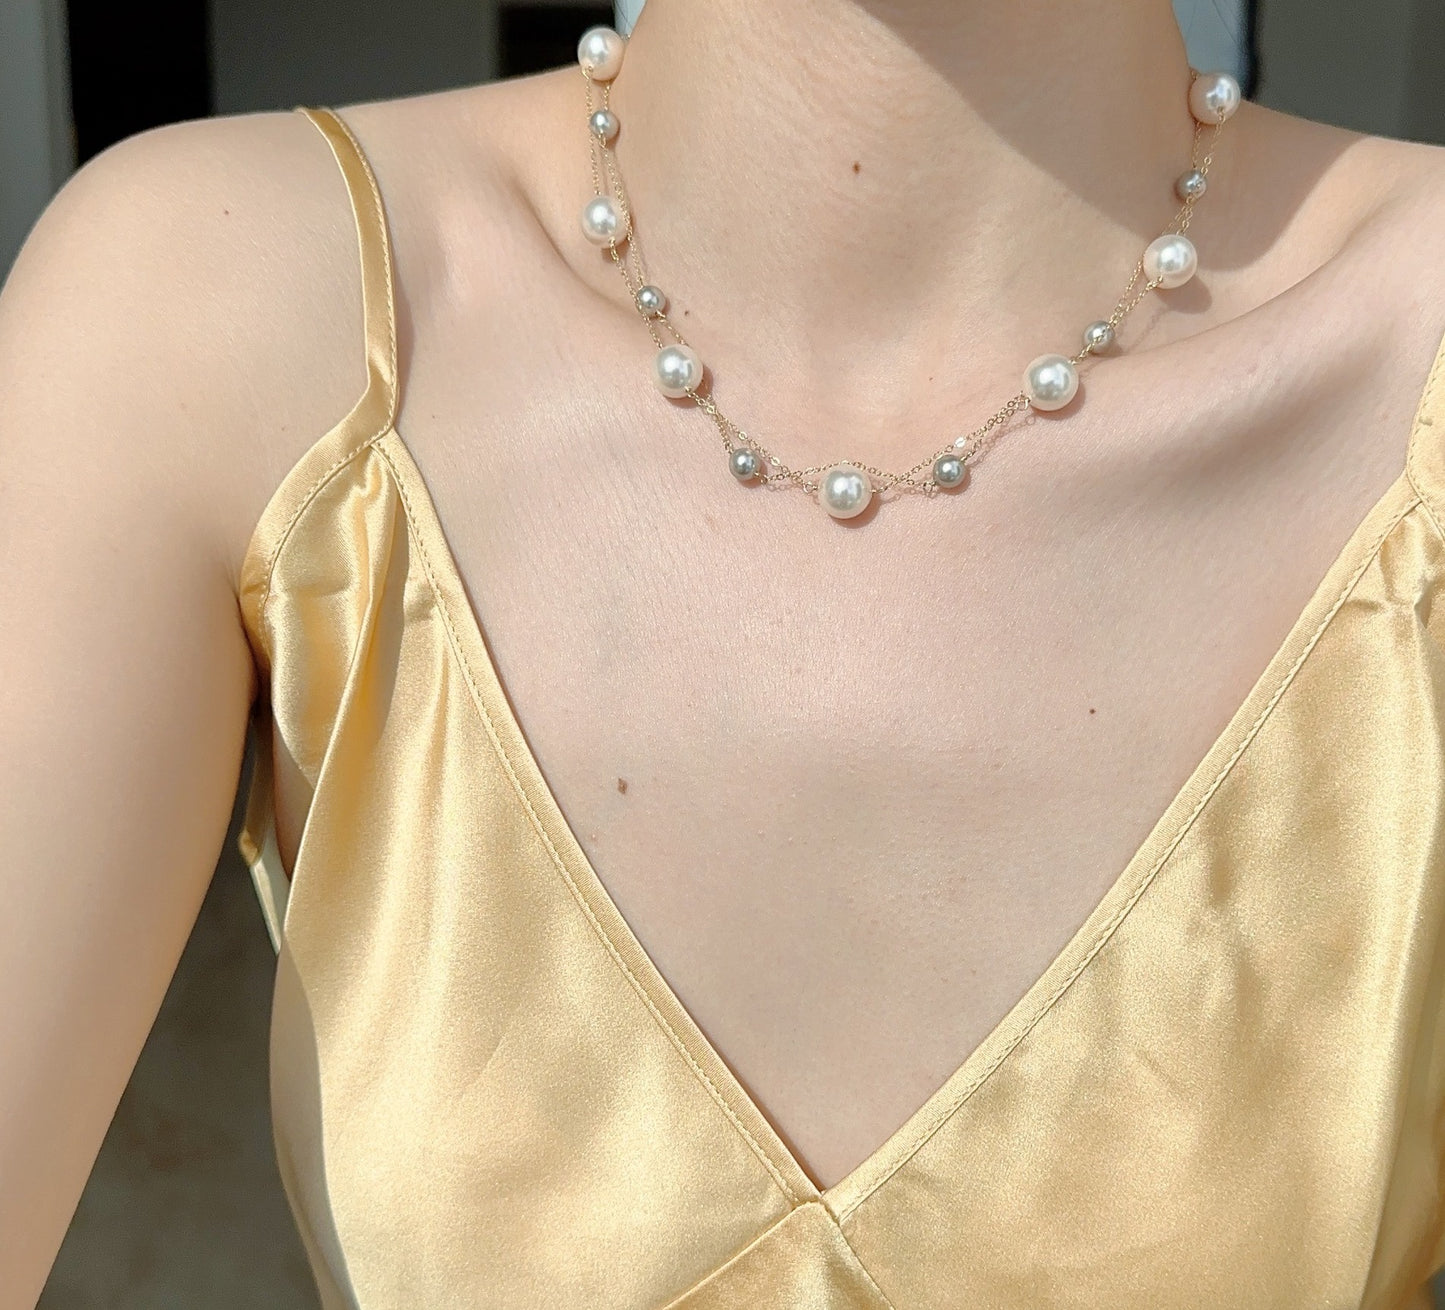 Fine Chain Elegant Style Multiple Pearl And Sliver Bead Necklace